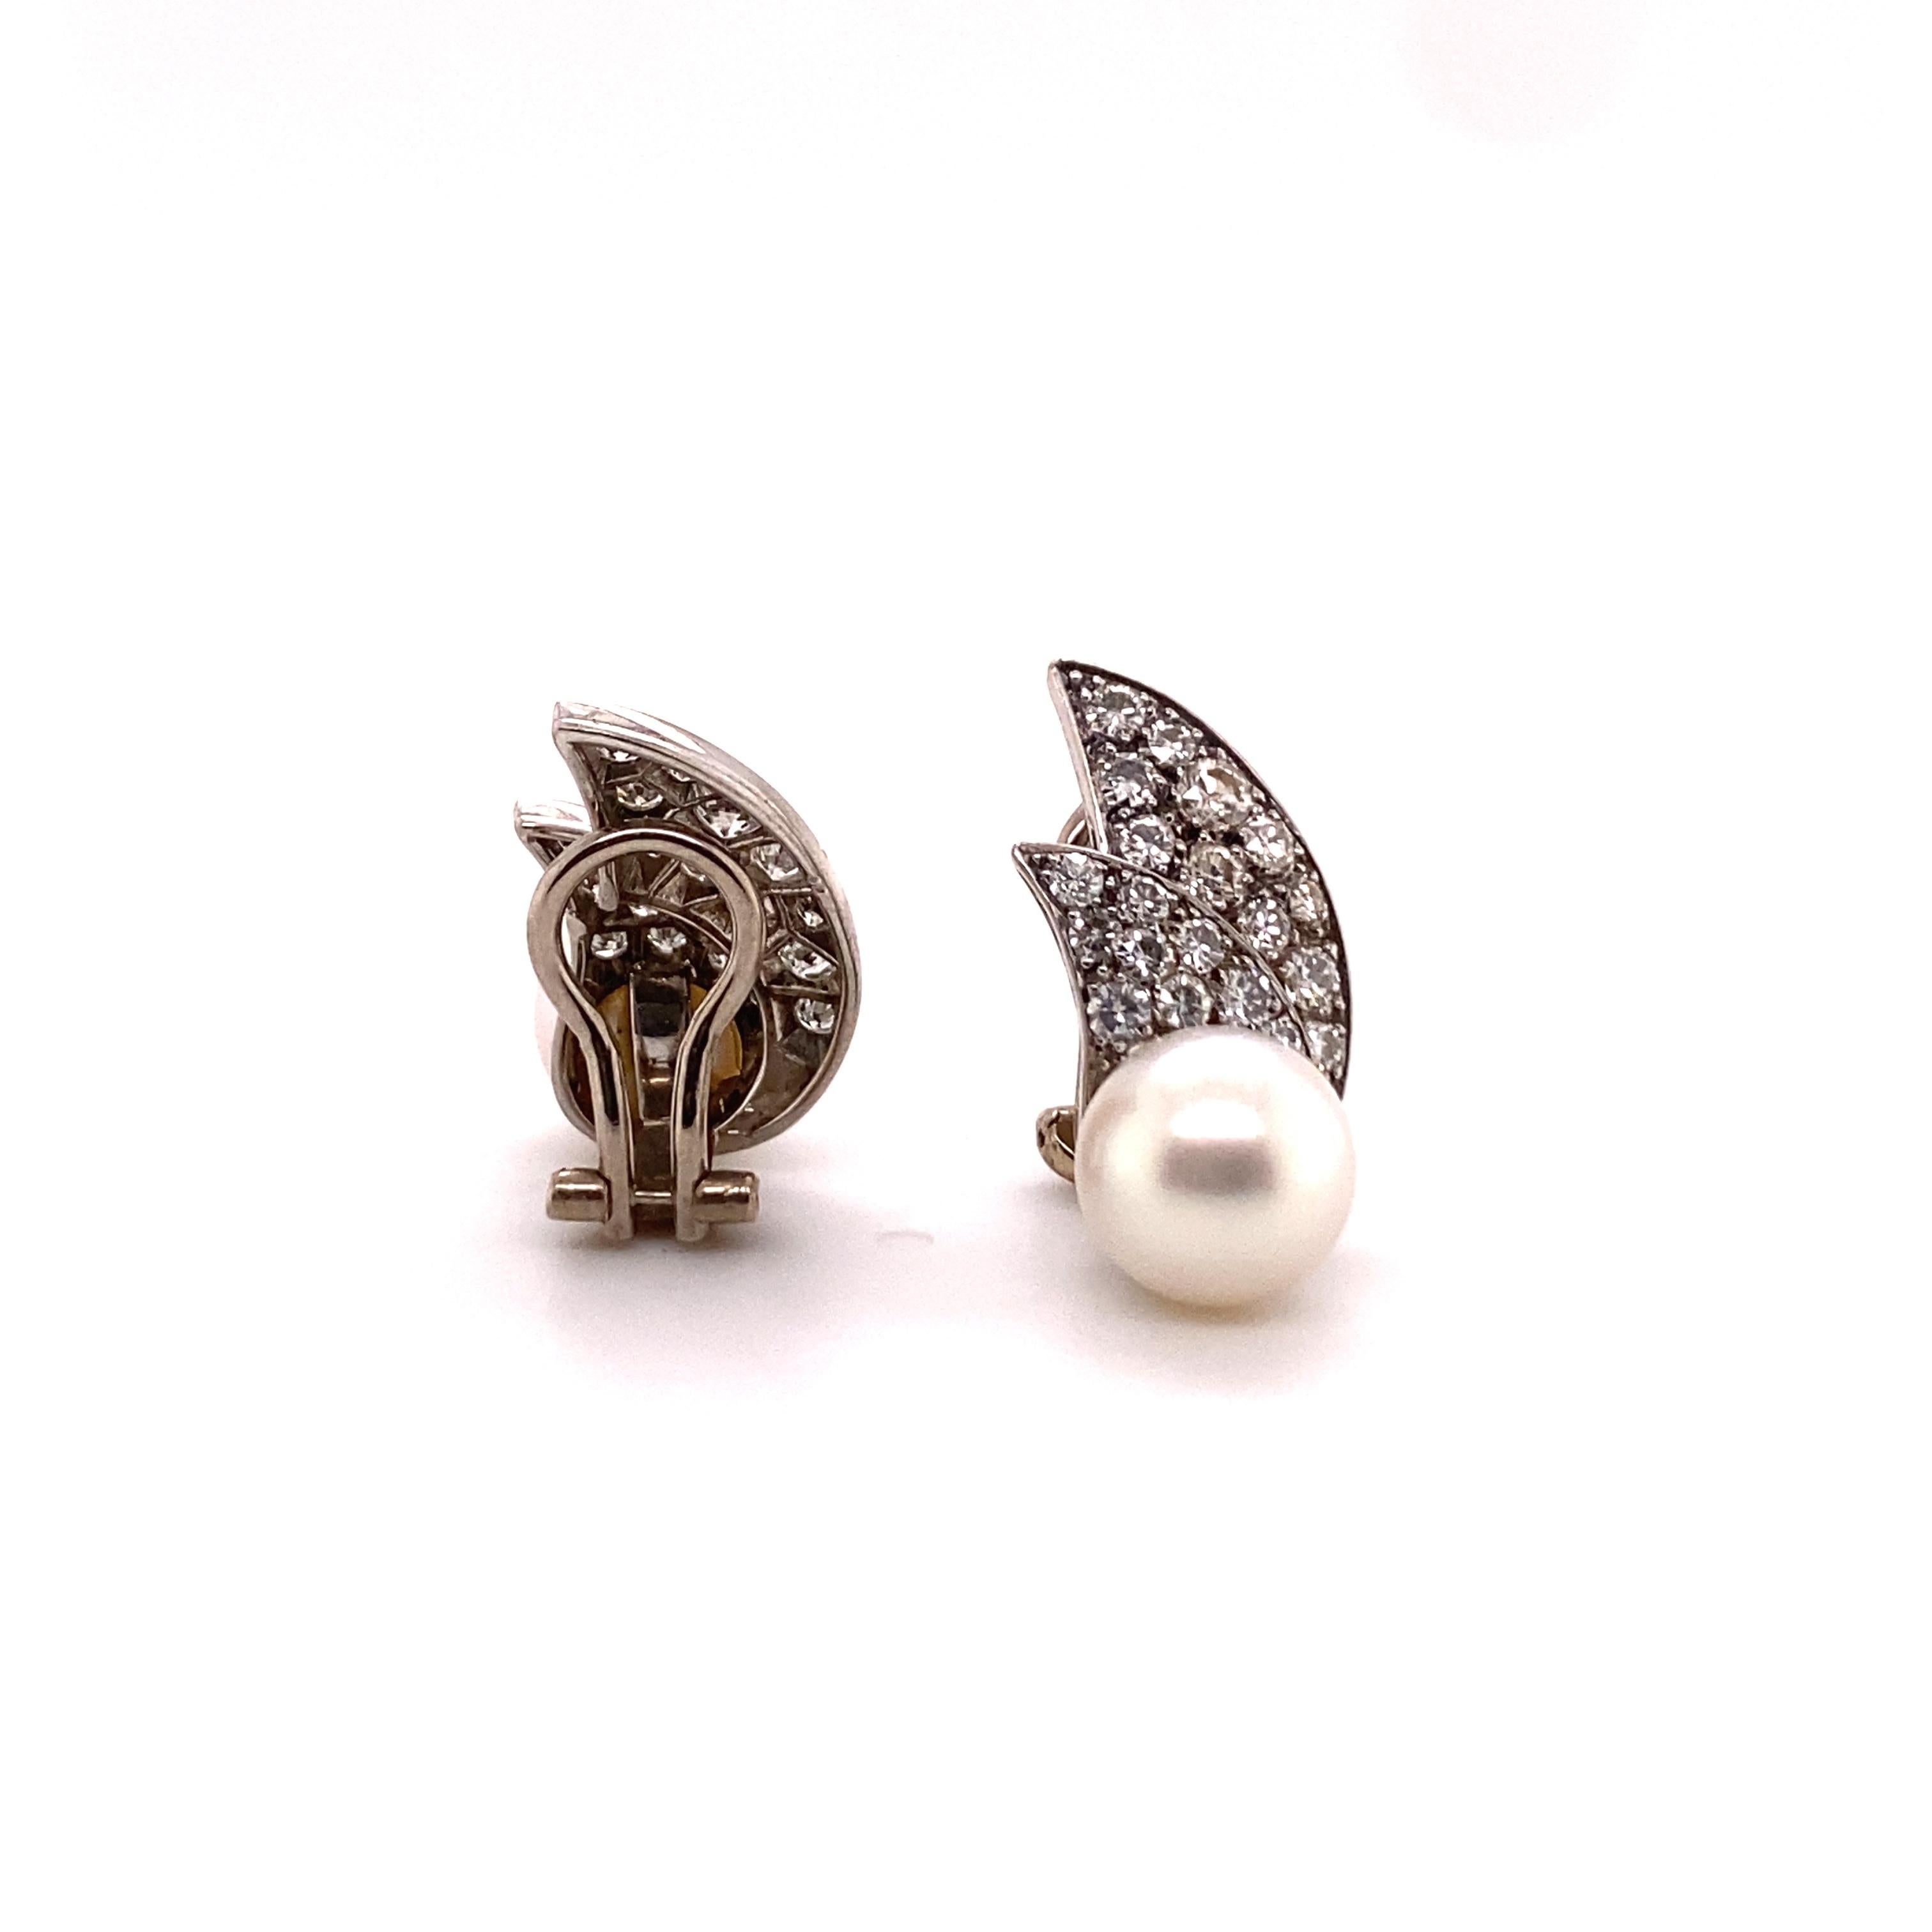 Brilliant Cut Funky Cultured Pearl and Diamond Ear Clips in Platinum